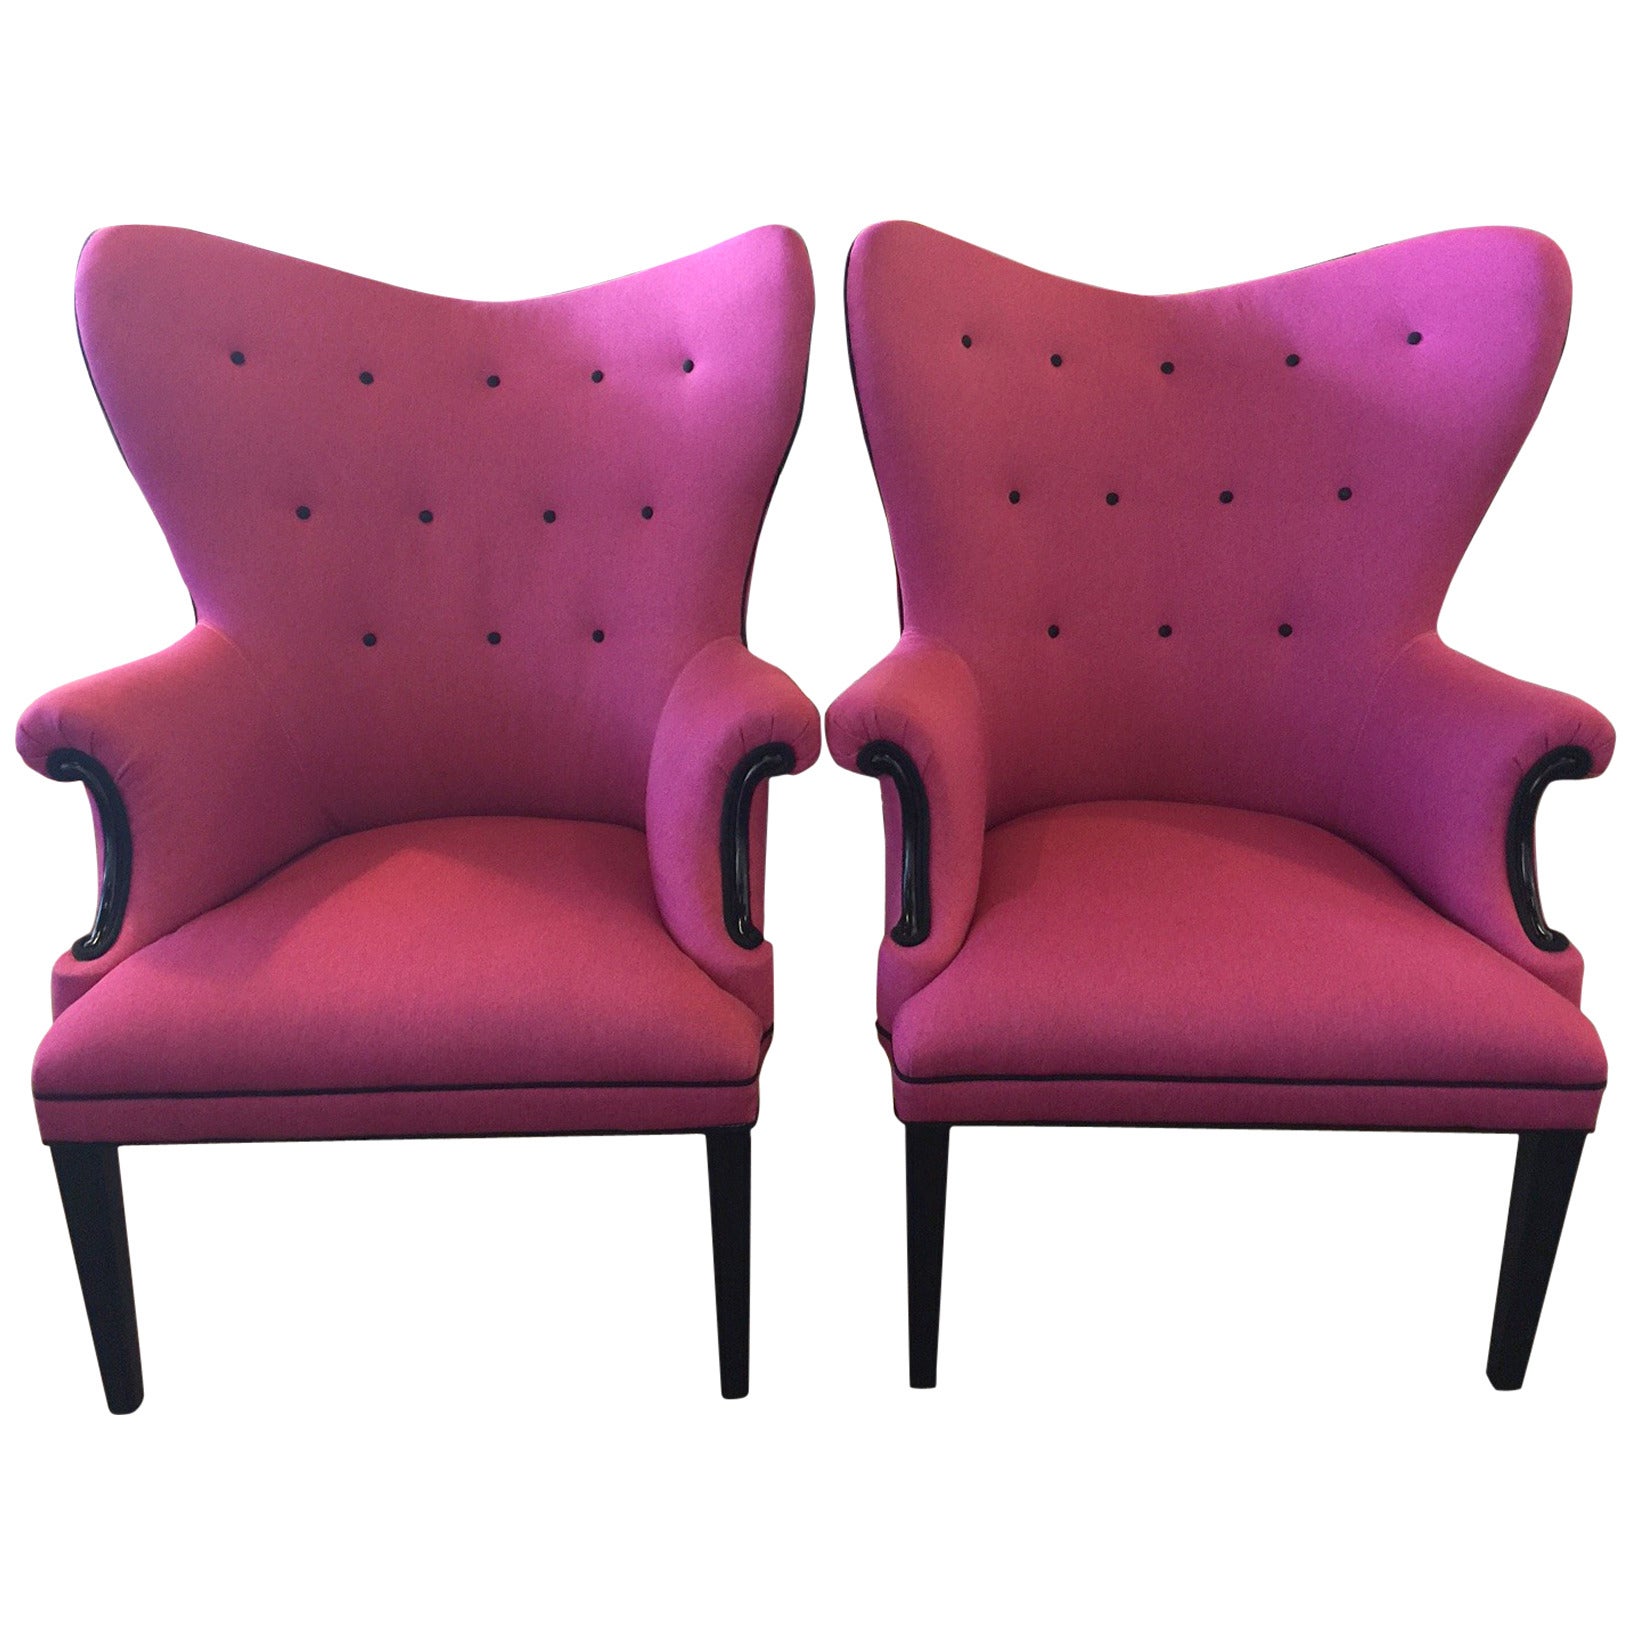 Wingback Hot Pink and Black Linen Chairs- Only One Remaining!!